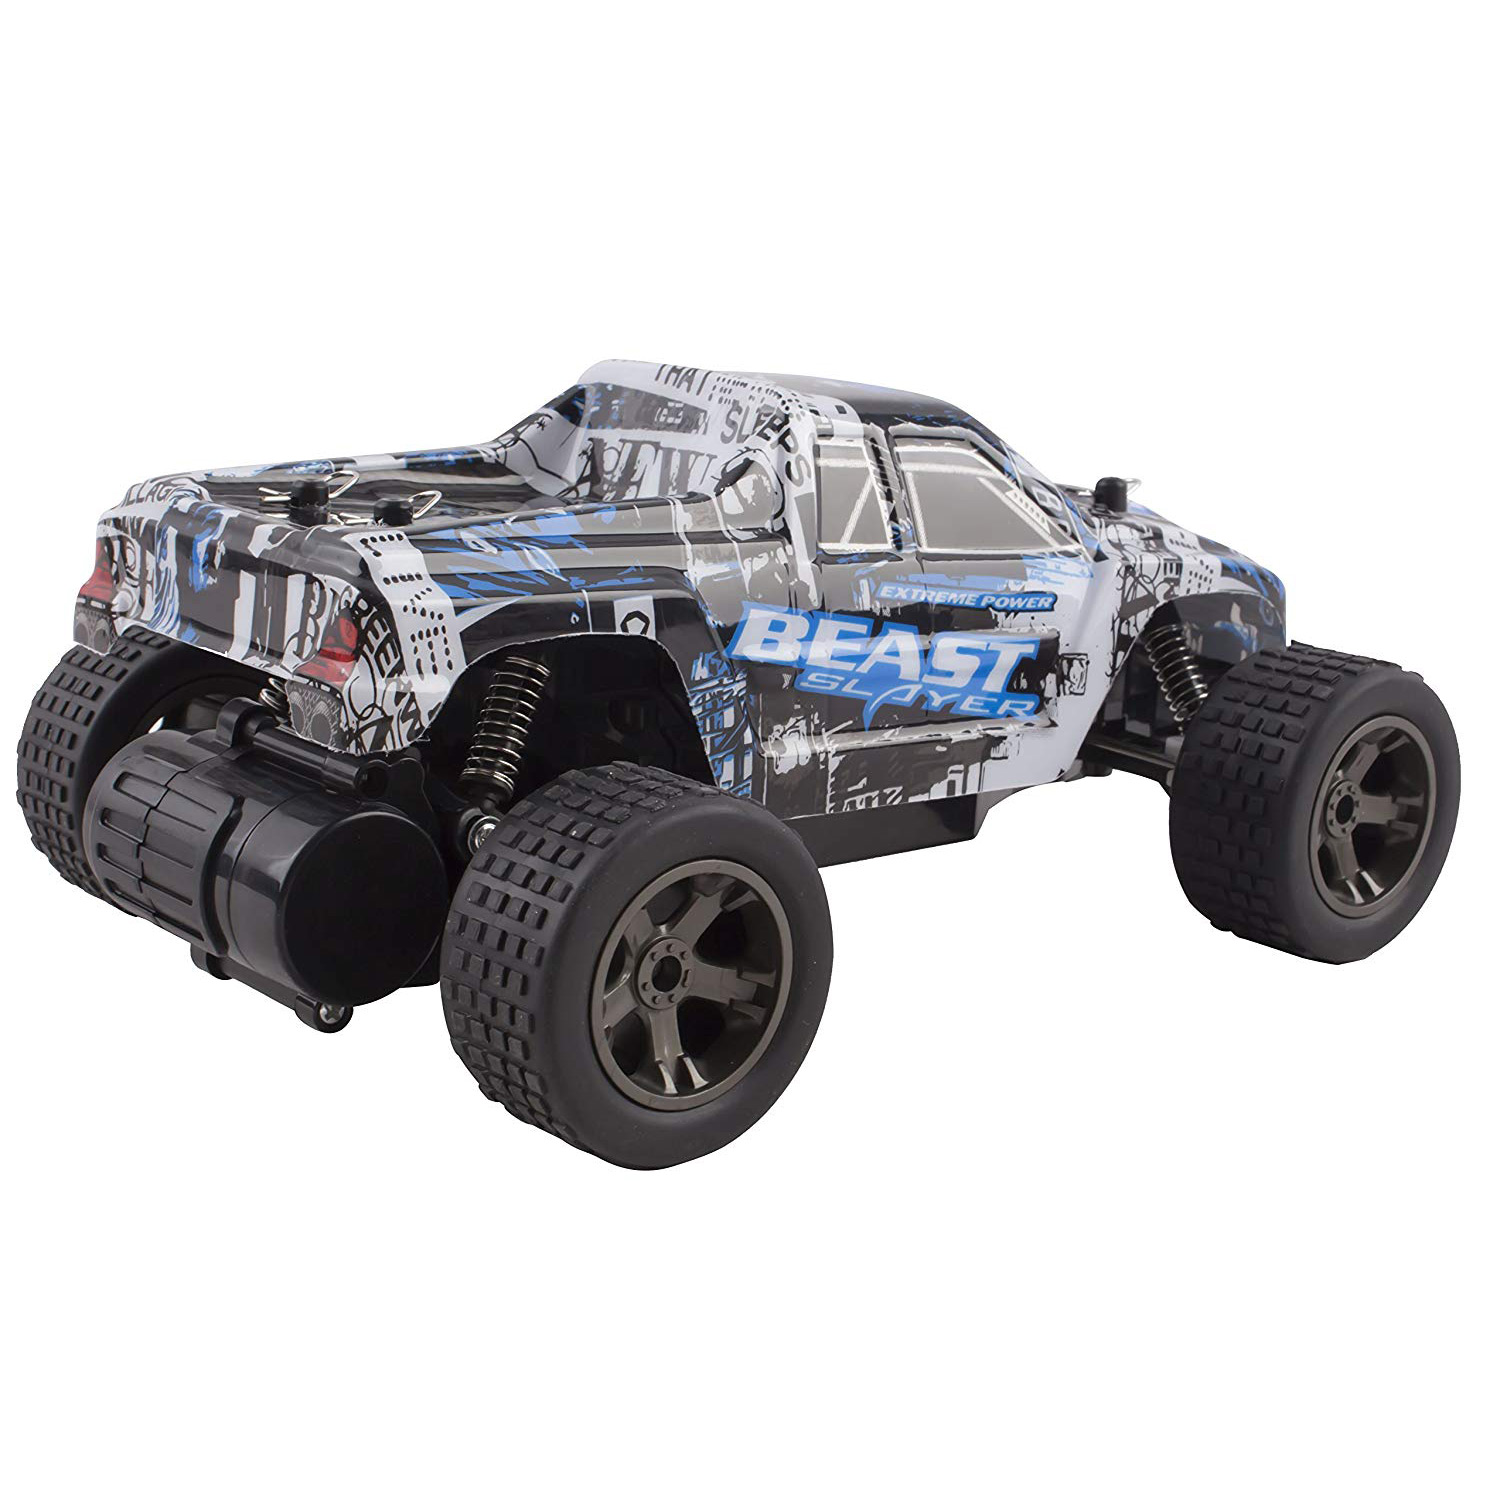 Remote control RC truck off road off-road high speed